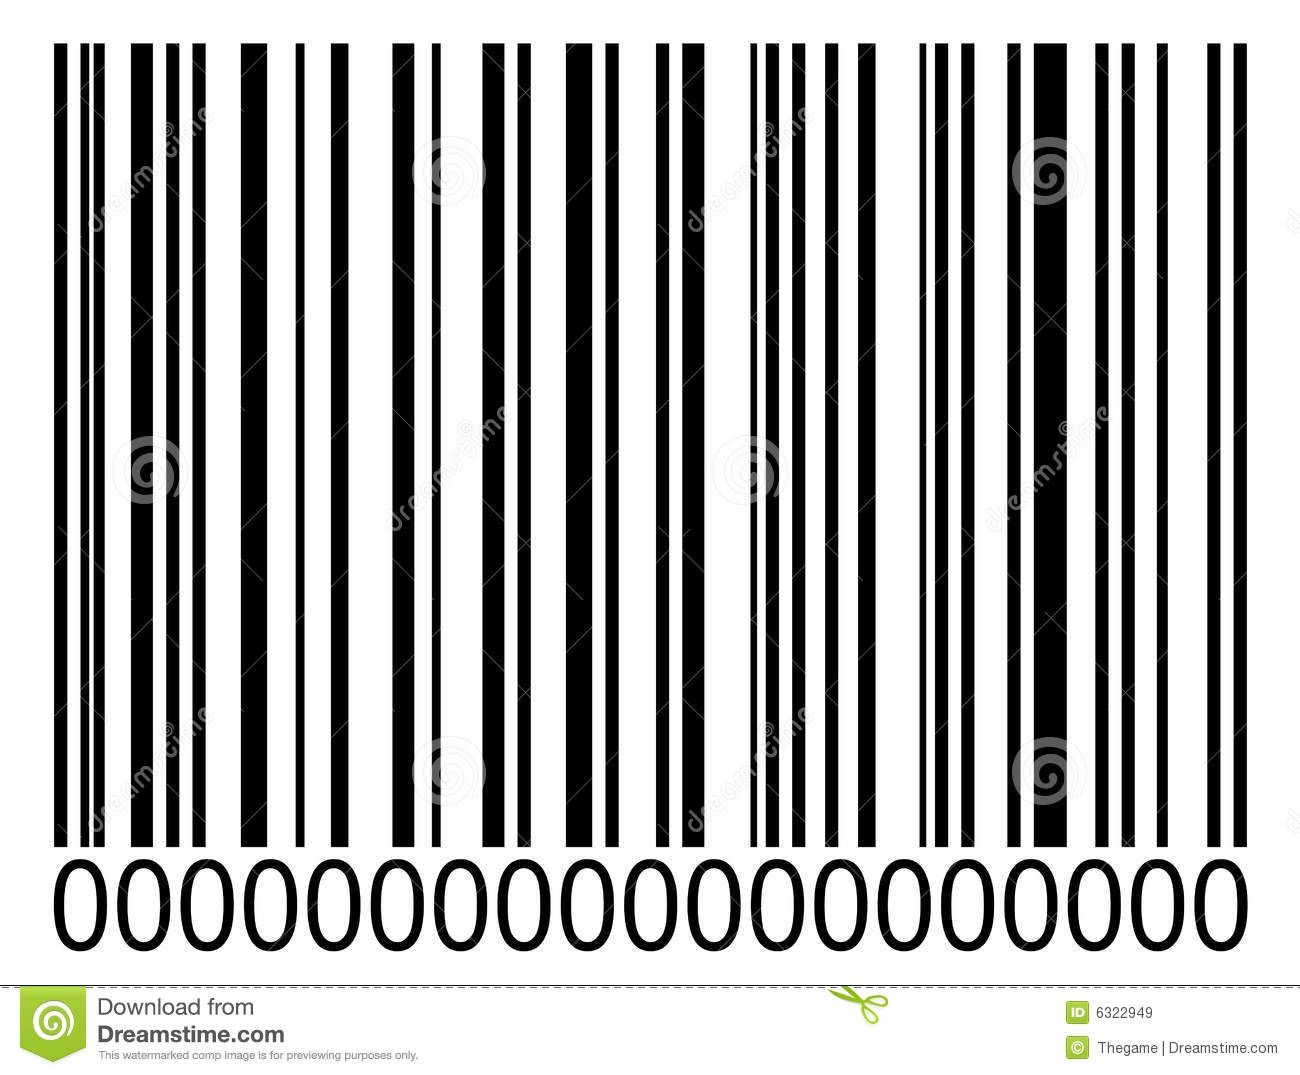 Barcode Royalty Free Stock Images   Image  6322949